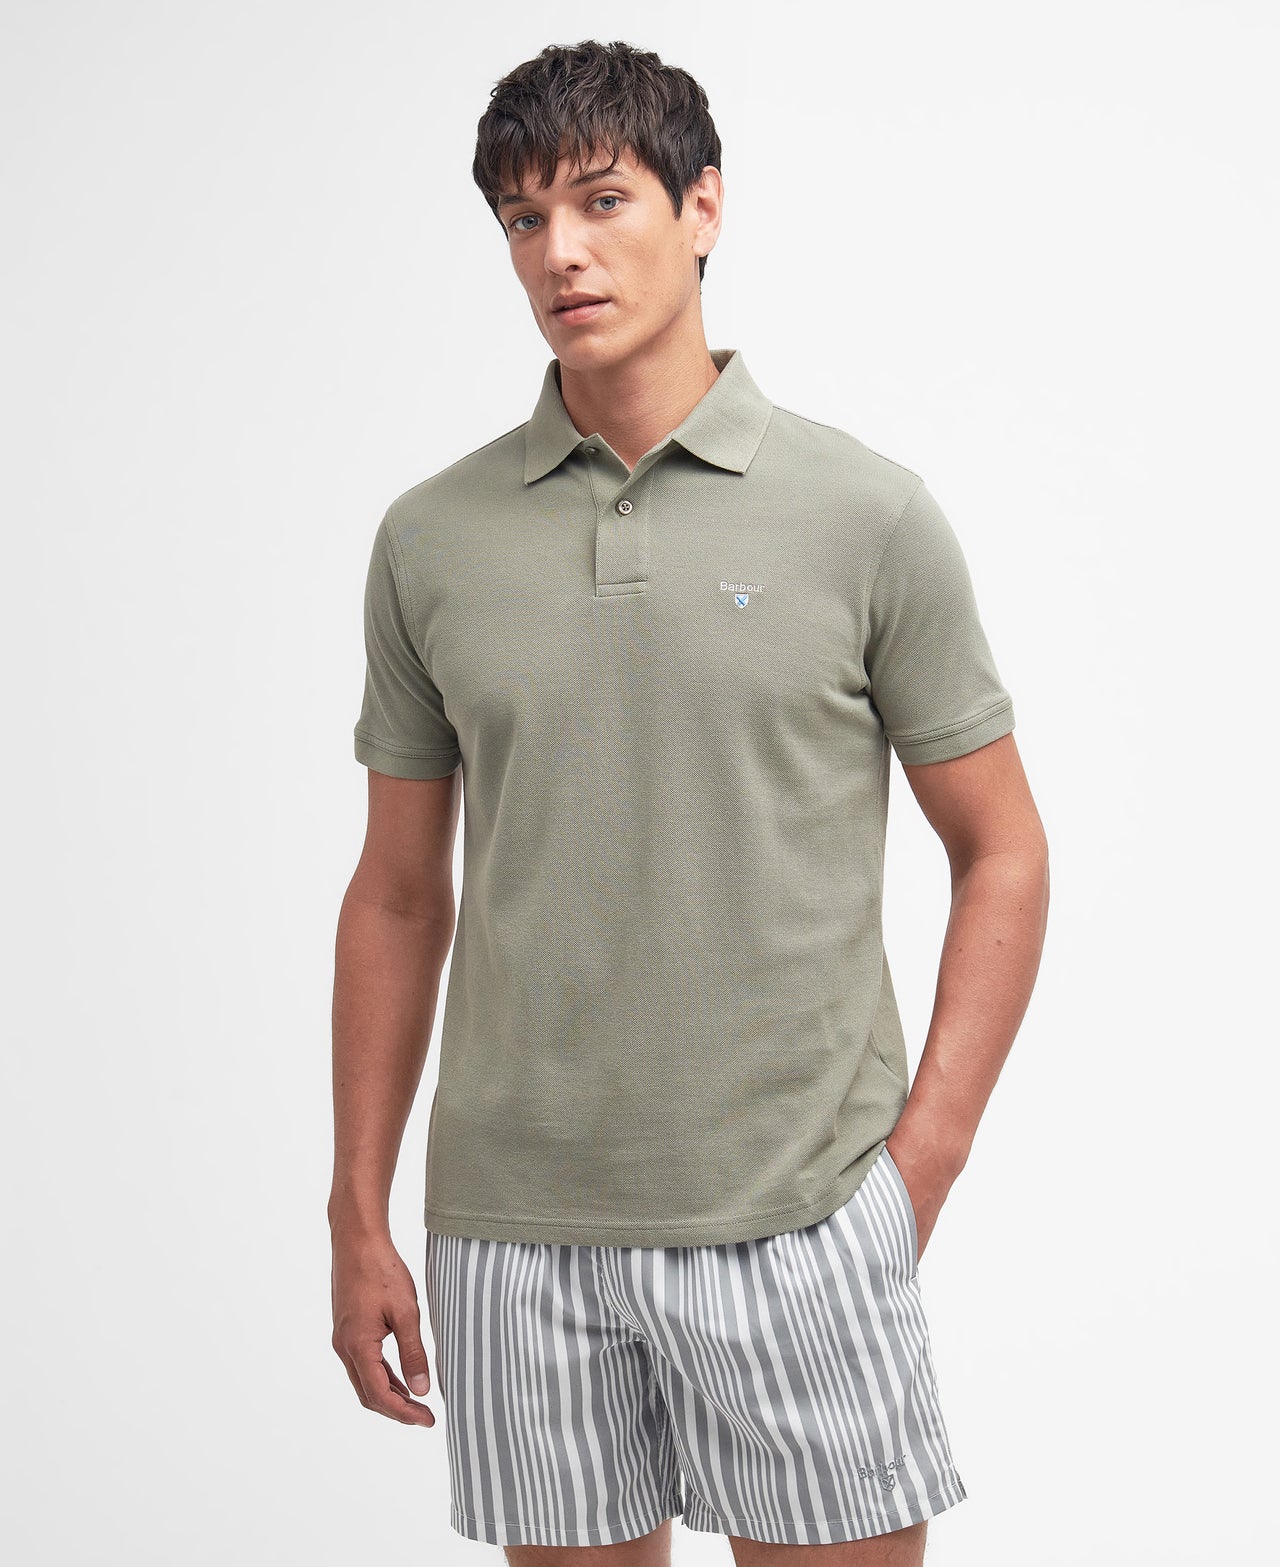 Barbour Sports Polo Top - Olive